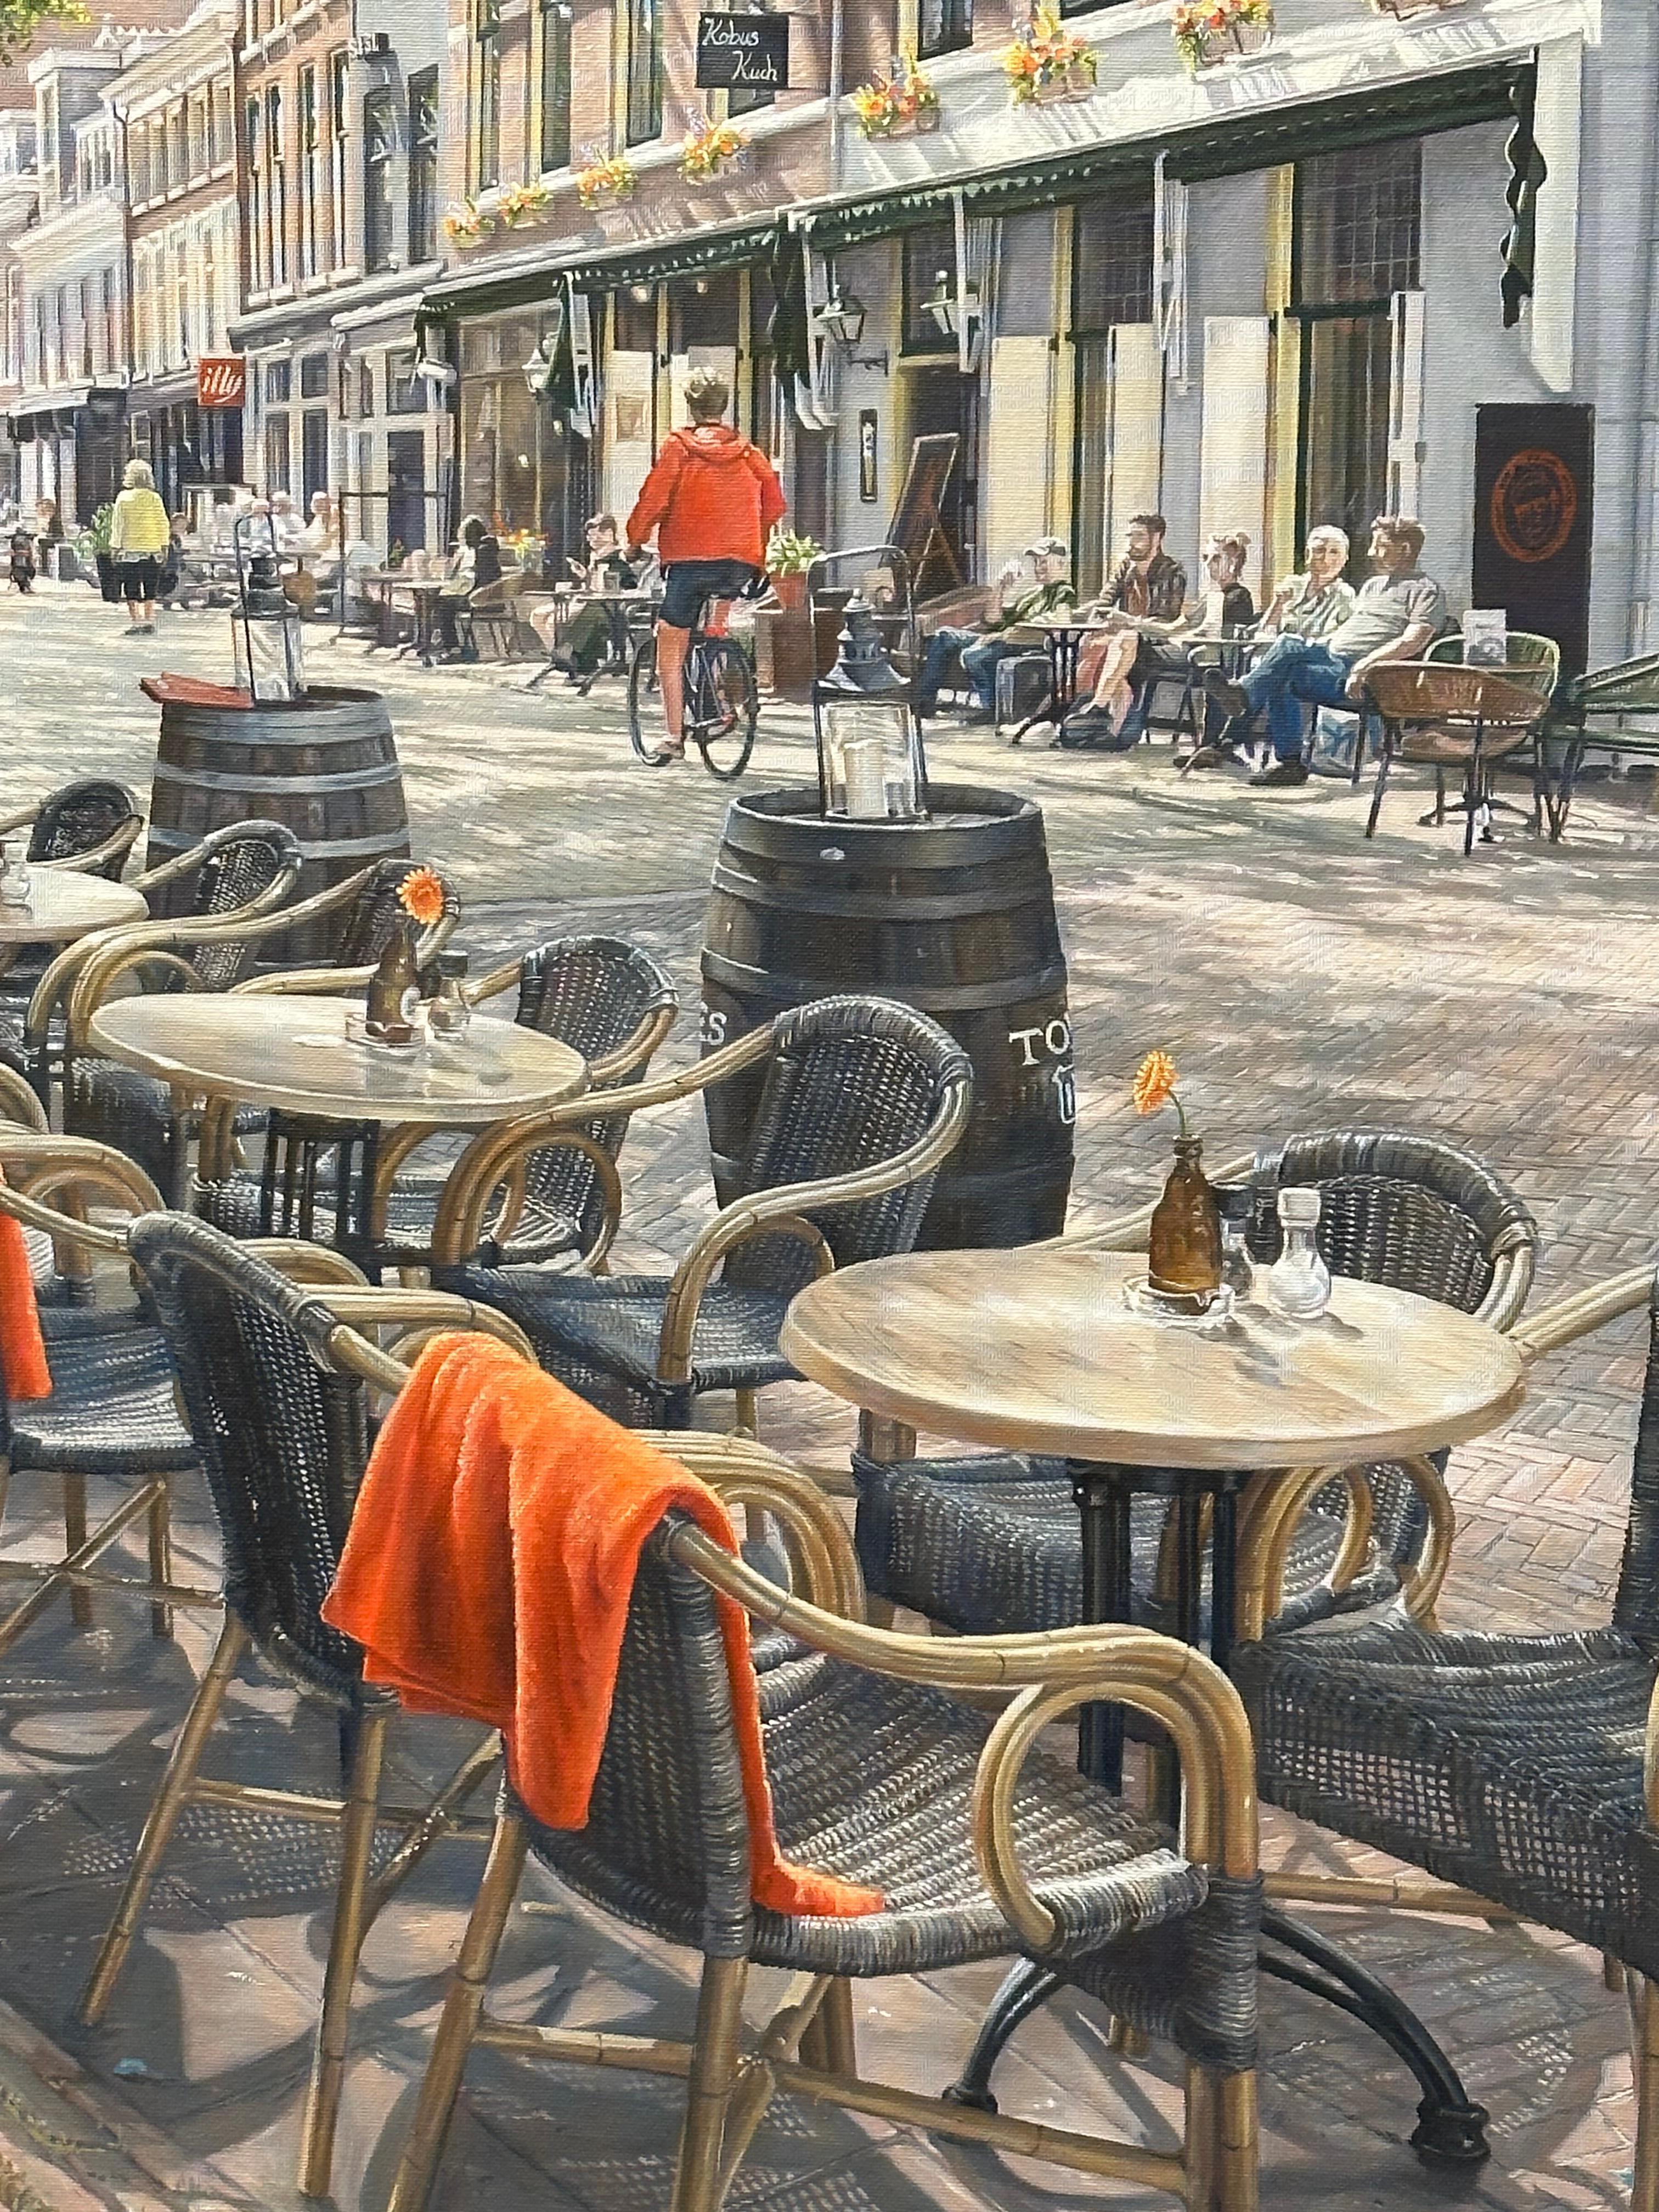 Kobus Kuch, Delft - 21st Century Hyper Realistic oil painting of a Dutch City - Gray Figurative Painting by Roos van der Meijden